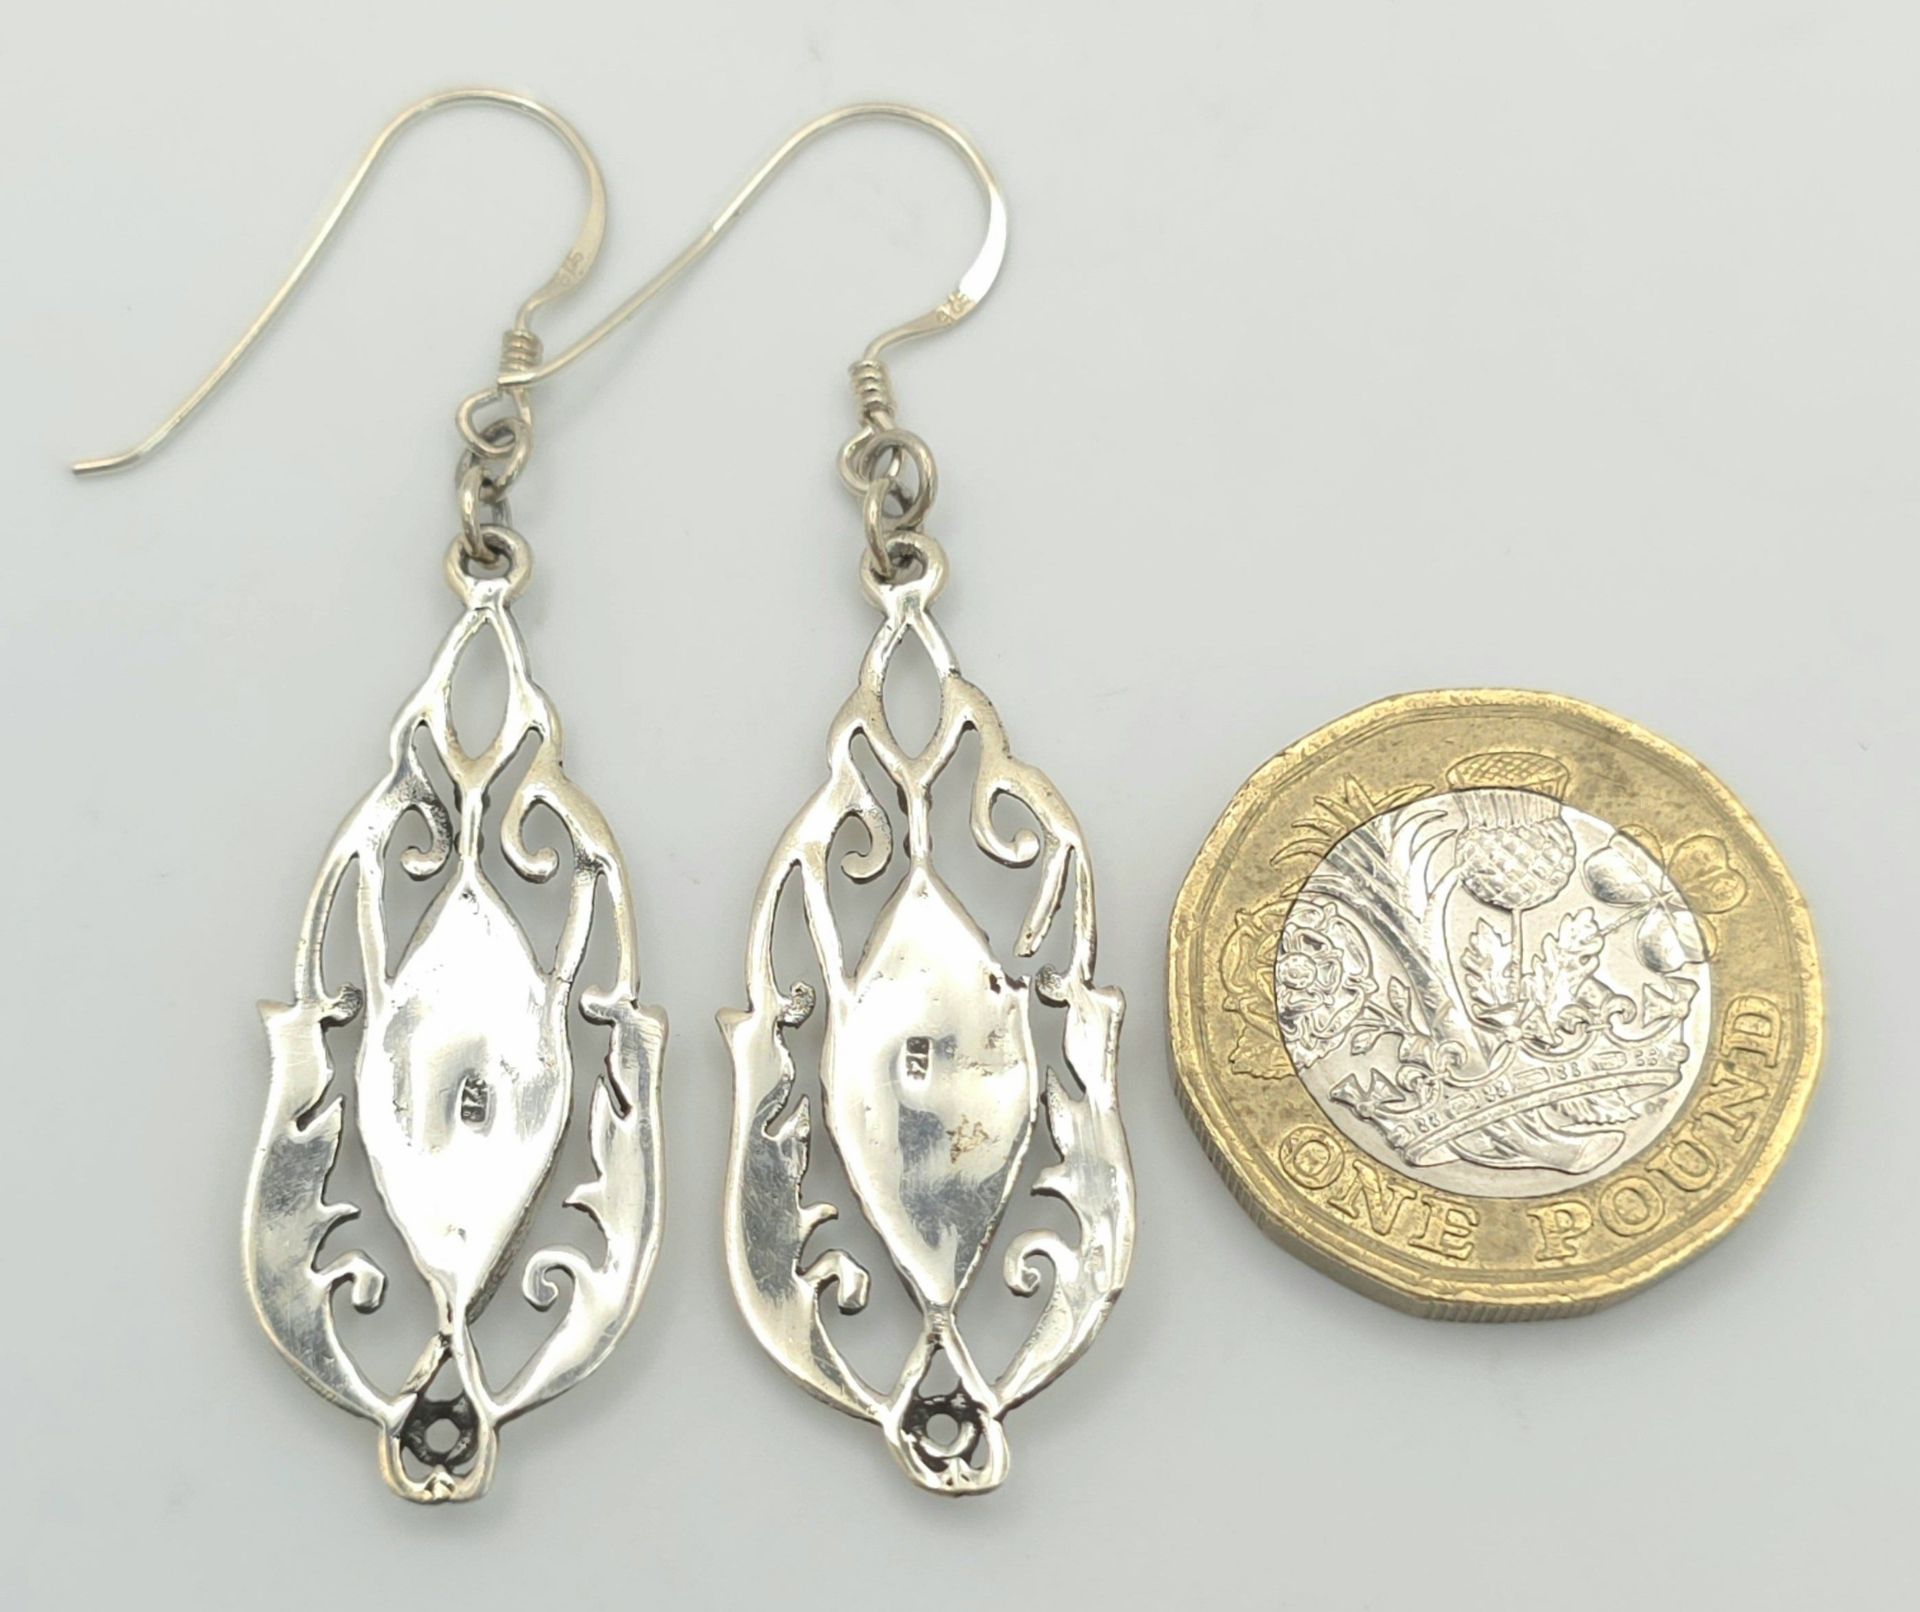 A Vintage Pair of Mother of Pearl Set Filigree Earrings. 5cm Drop. 1.5cm Wide at widest point. - Image 4 of 5